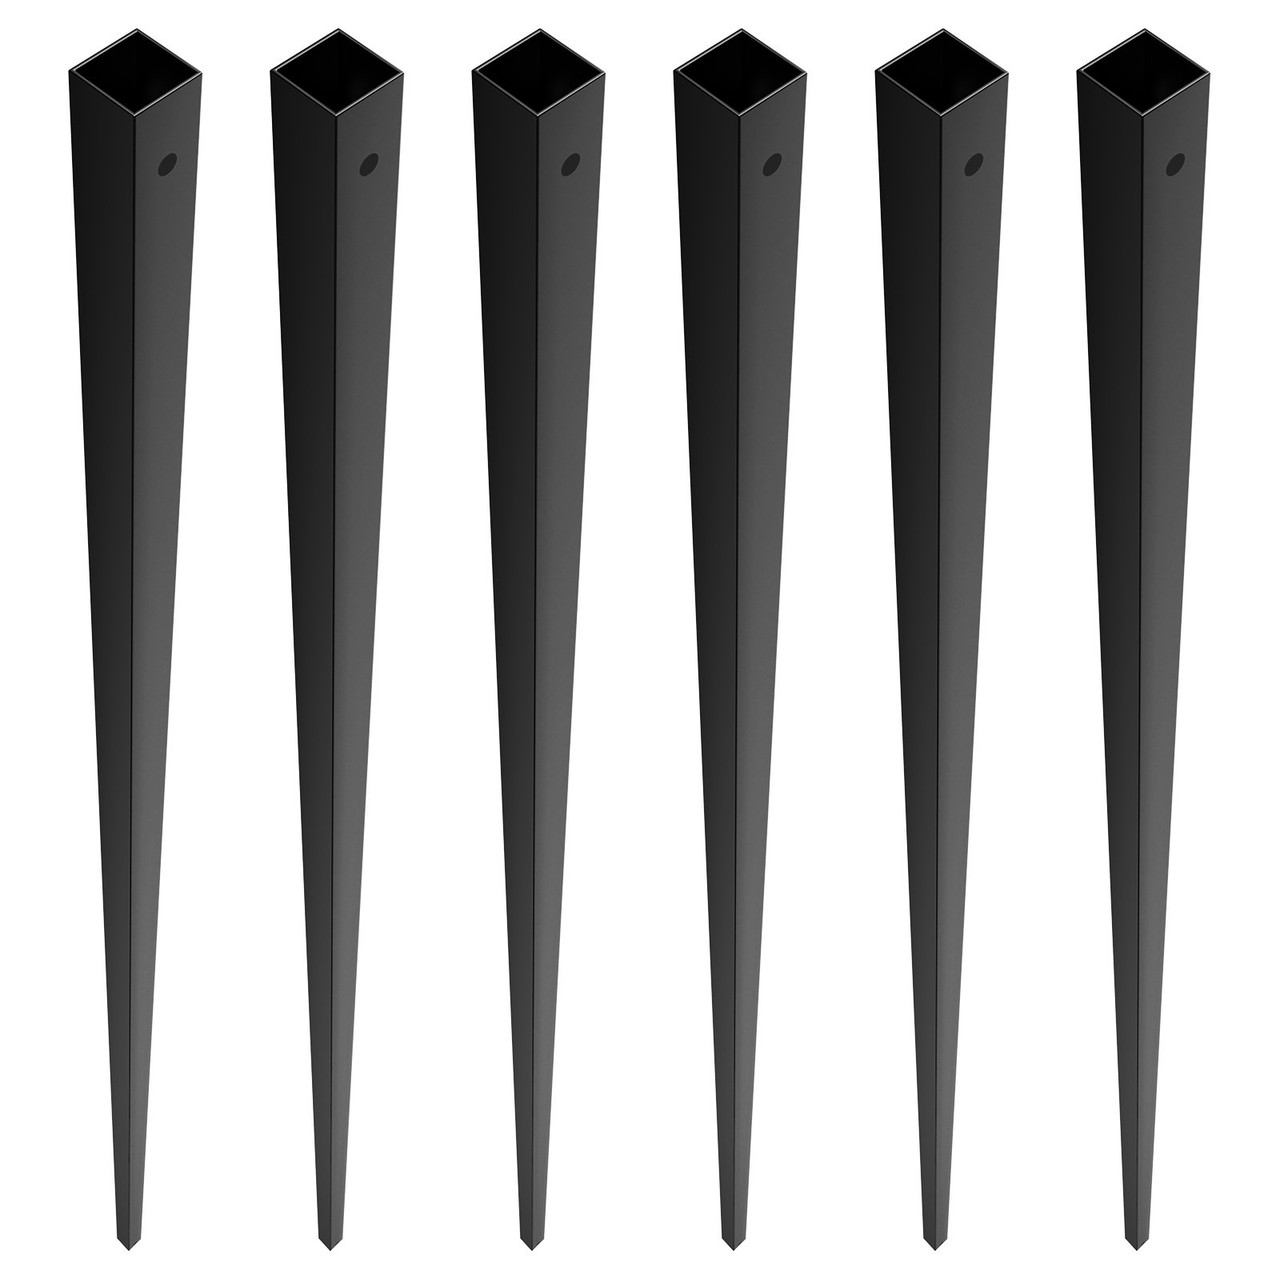 VEVOR Staircase Metal Balusters, 44'' x 0.5'' Square Aluminum Alloy Decorative Banister Spindles, 11 Pack Deck Baluster with Screws, Classic Hollow Straight Deck Railing Satin Black Powder Coated